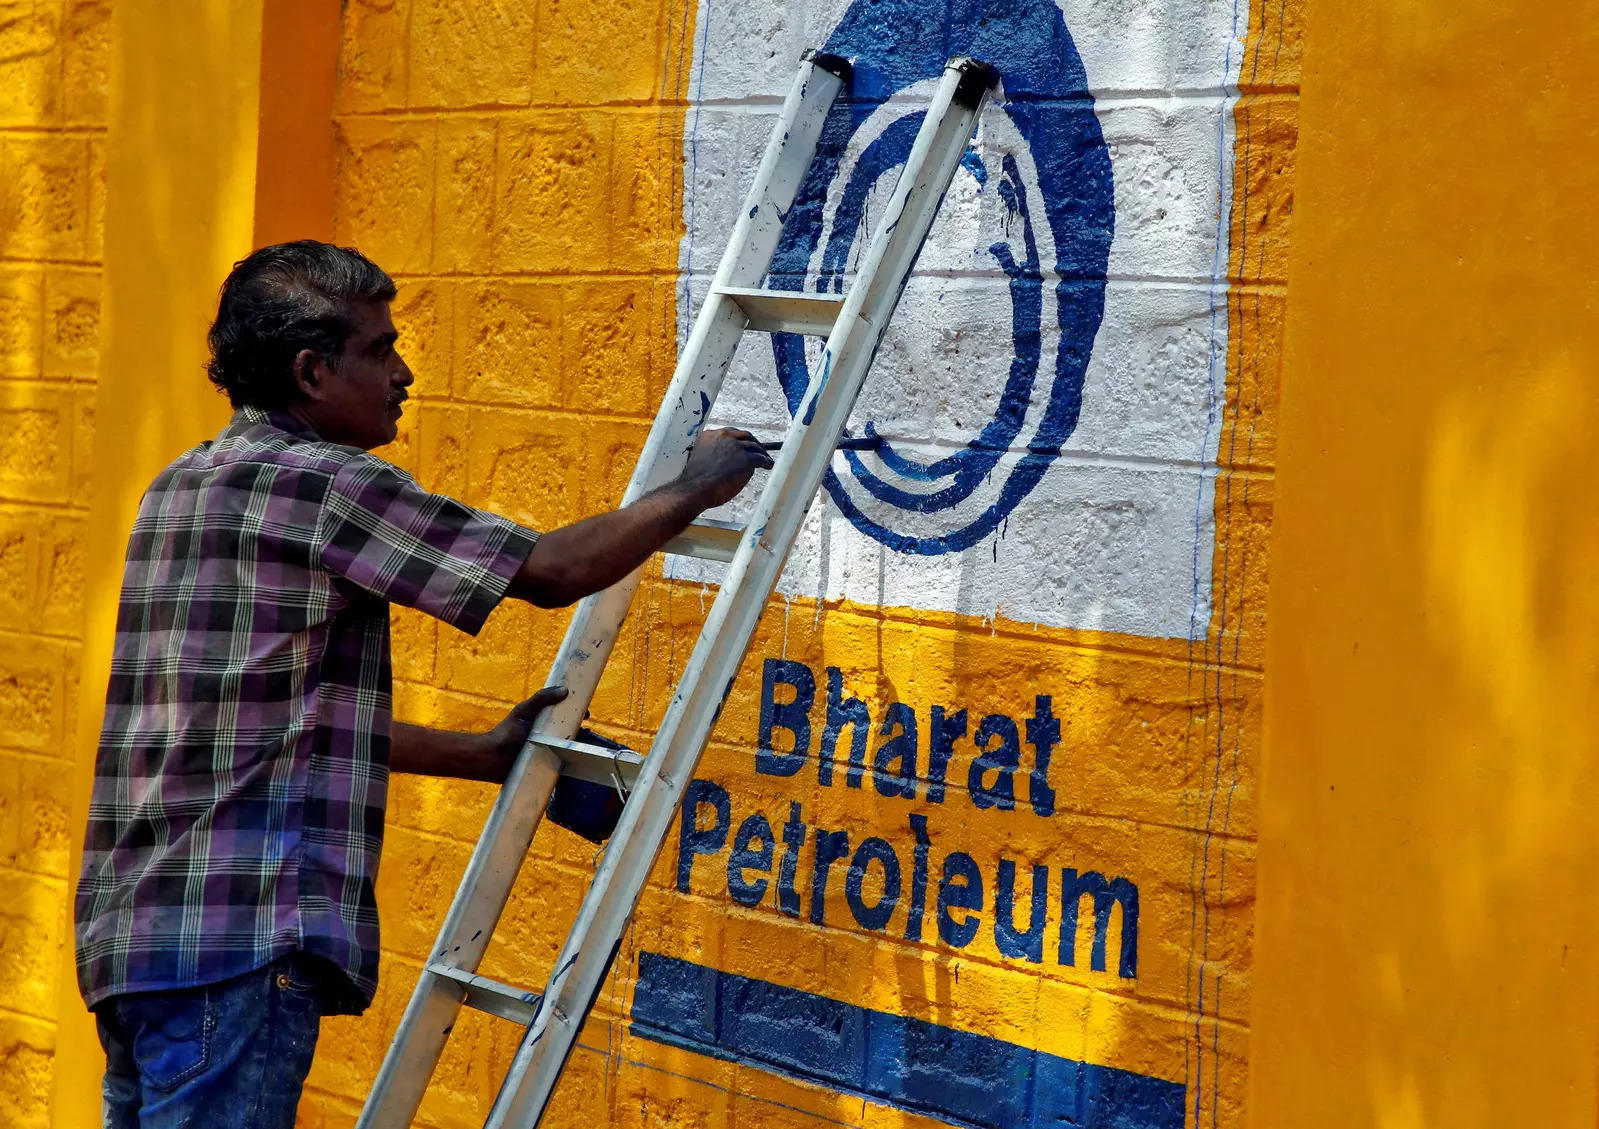 Arun Kumar Singh takes charge as Chairman and Managing Director of BPCL